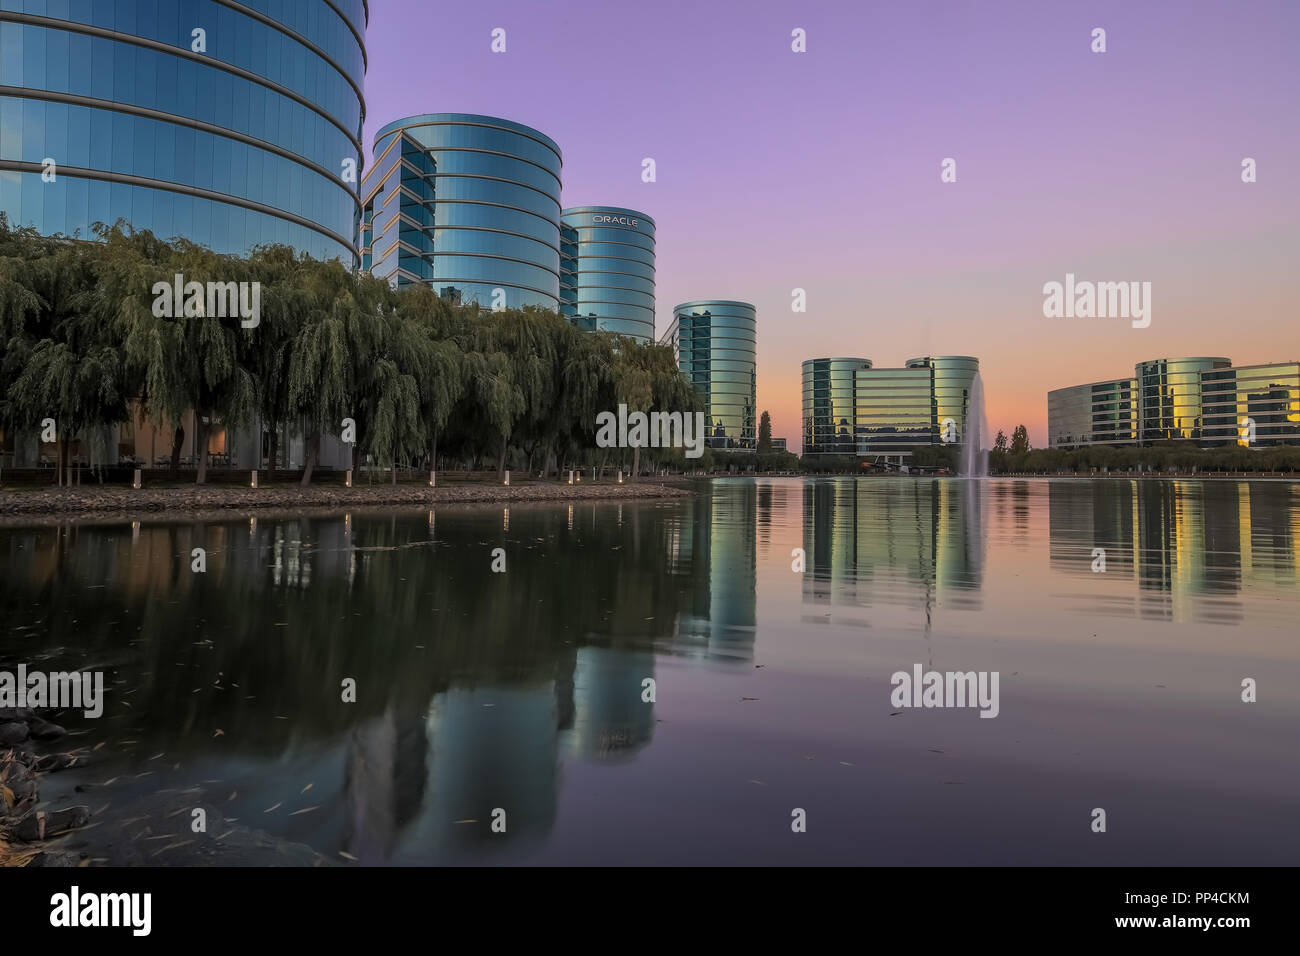 Oracle headquarters and lake with sunset skies Stock Photo